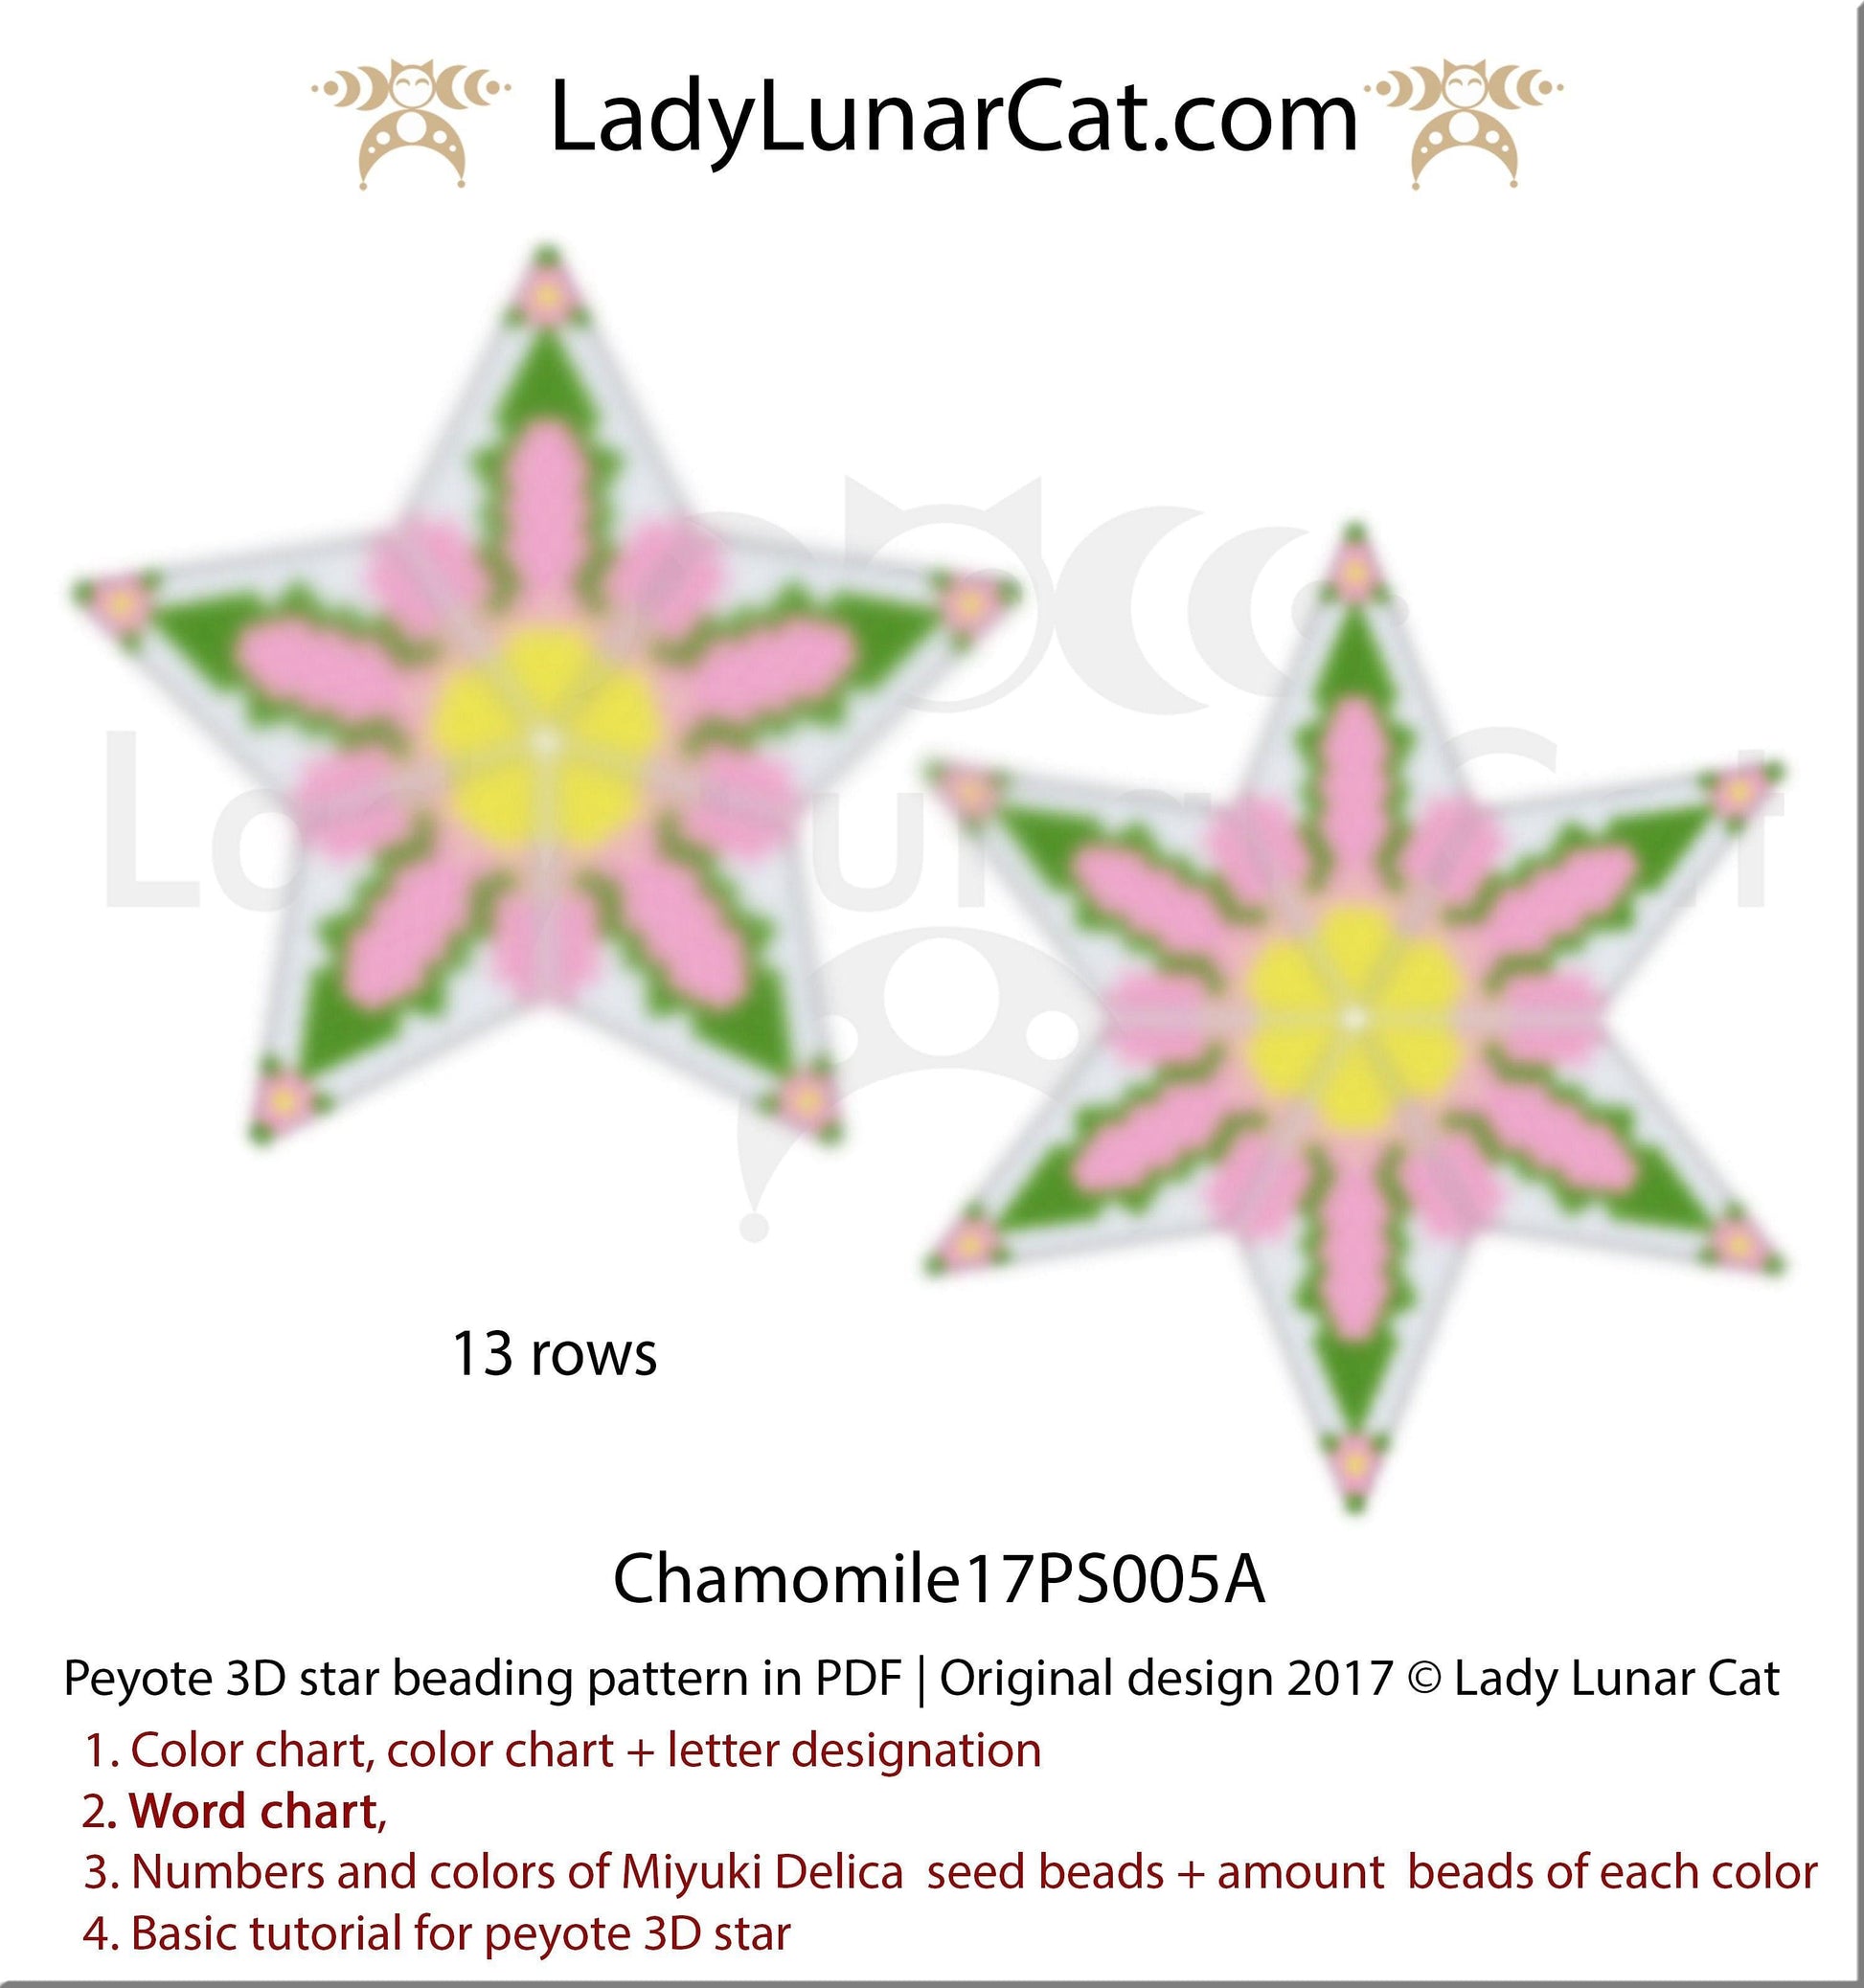 Beaded star pattern for beadweaving  Chamomile flowers 17PS005A LadyLunarCat